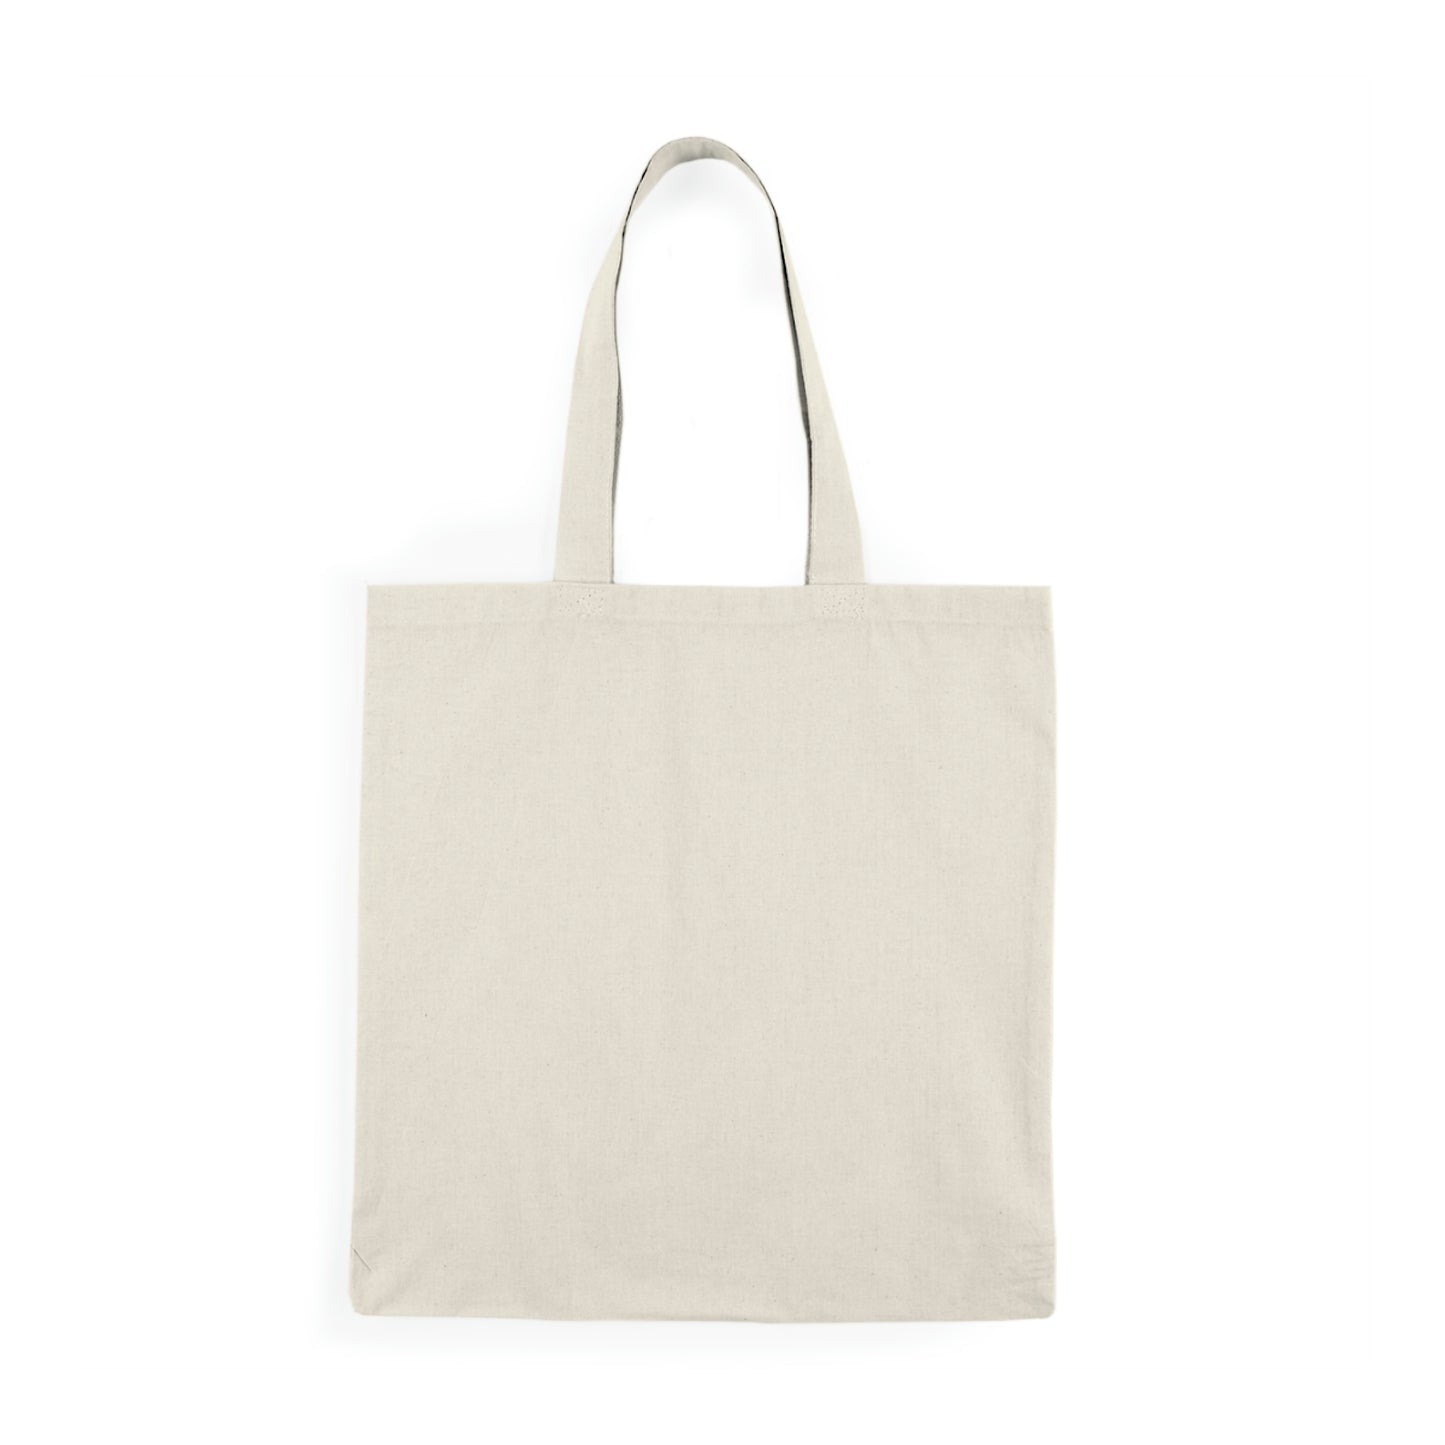 Heir of Ashes - Natural Tote Bag